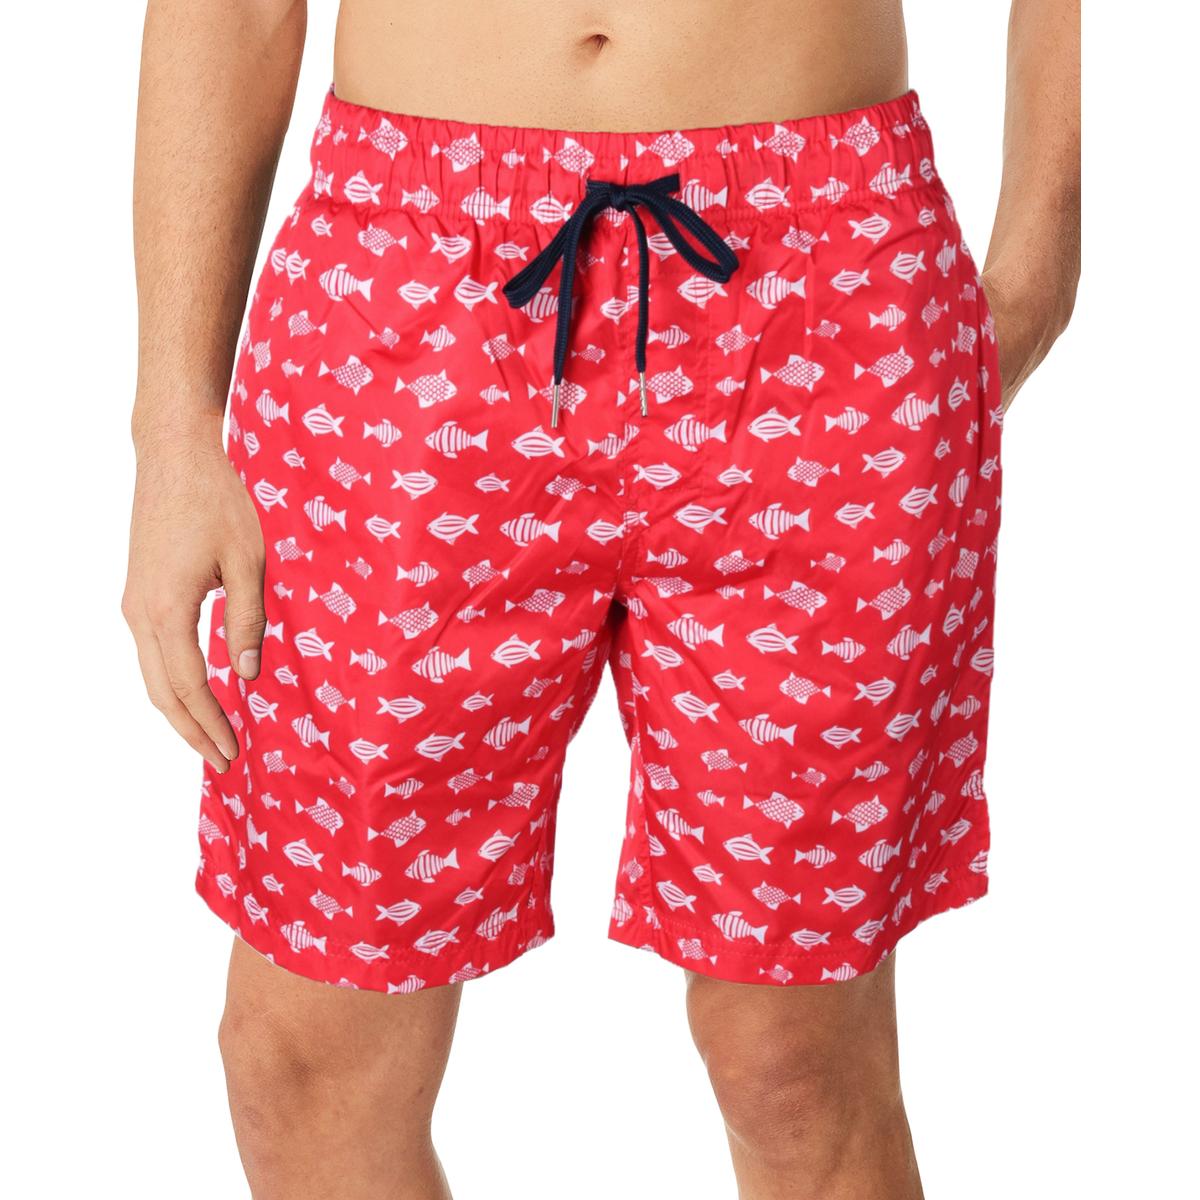 2xist Mens Catalina Red Woven Printed Swim Trunks Swimsuit M BHFO 6921 ...